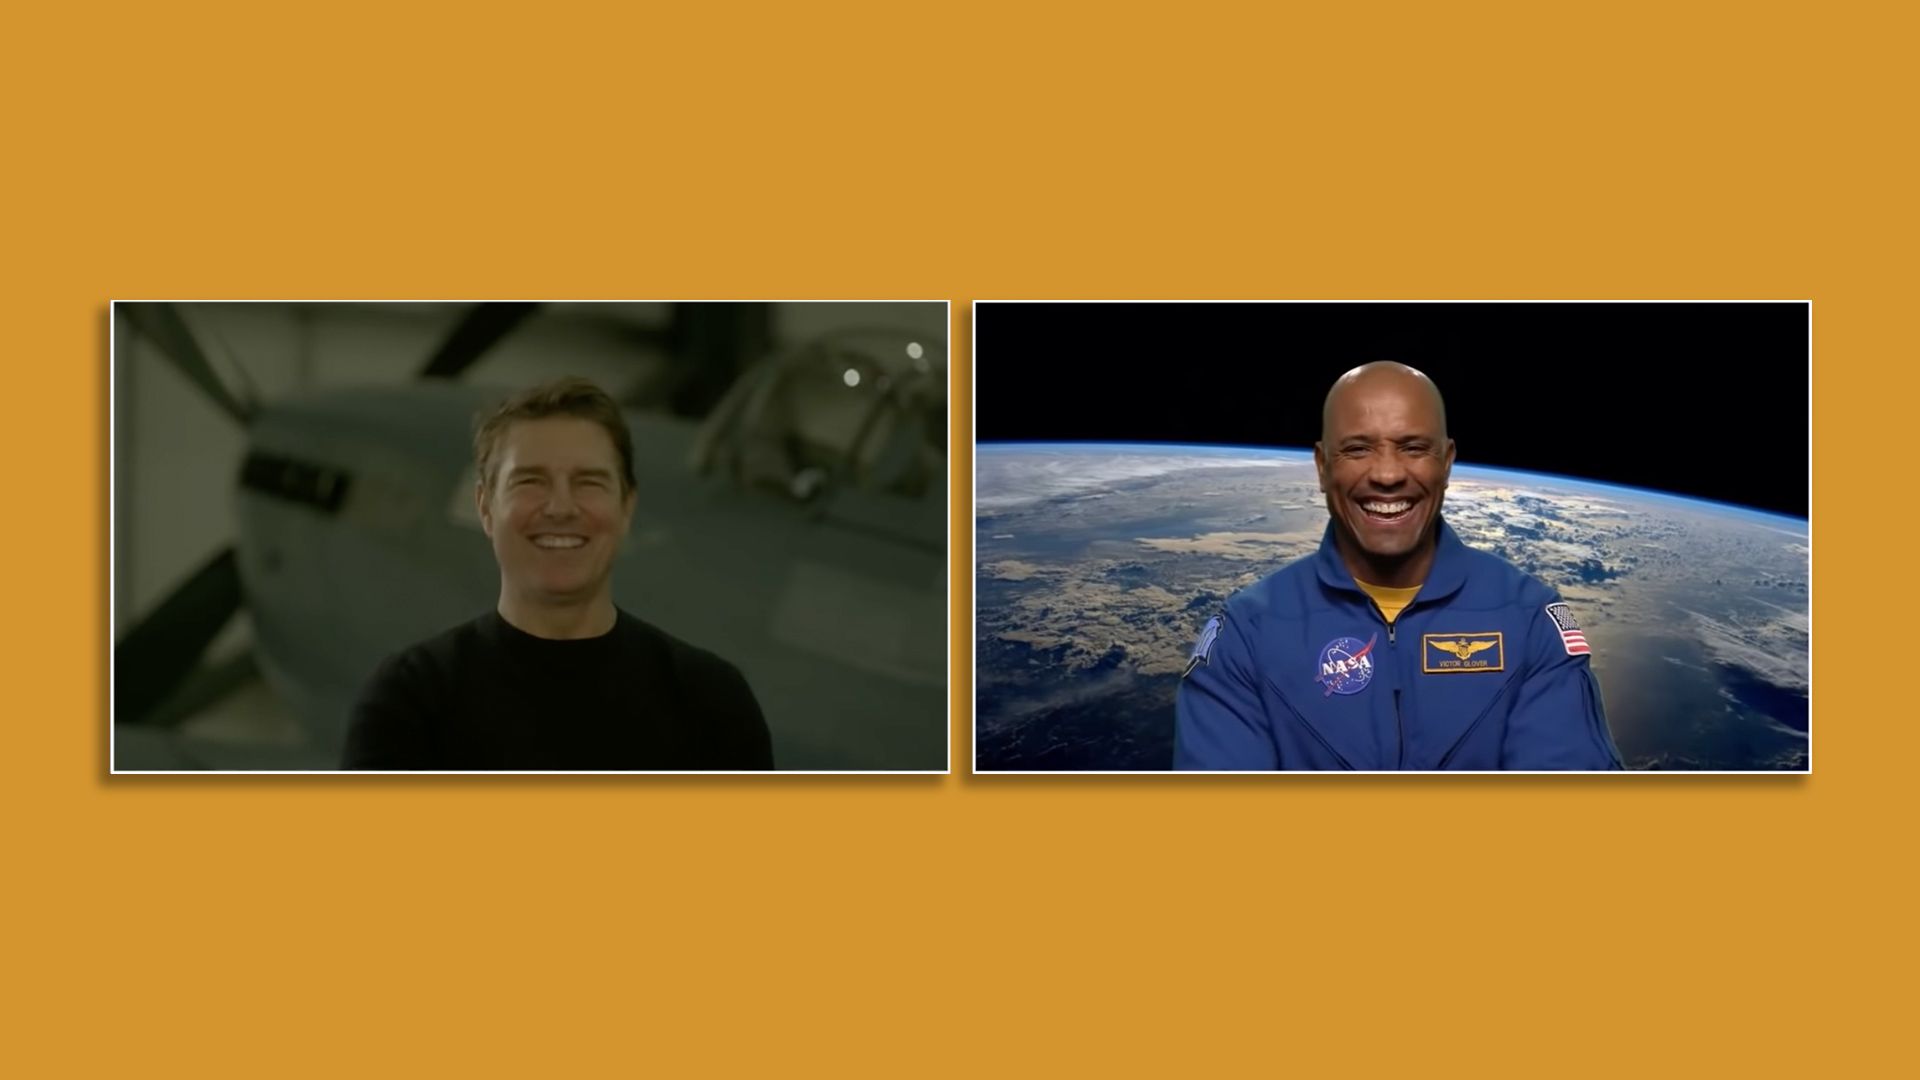 Tom Cruise speaking virtually to astronaut Victor Glover